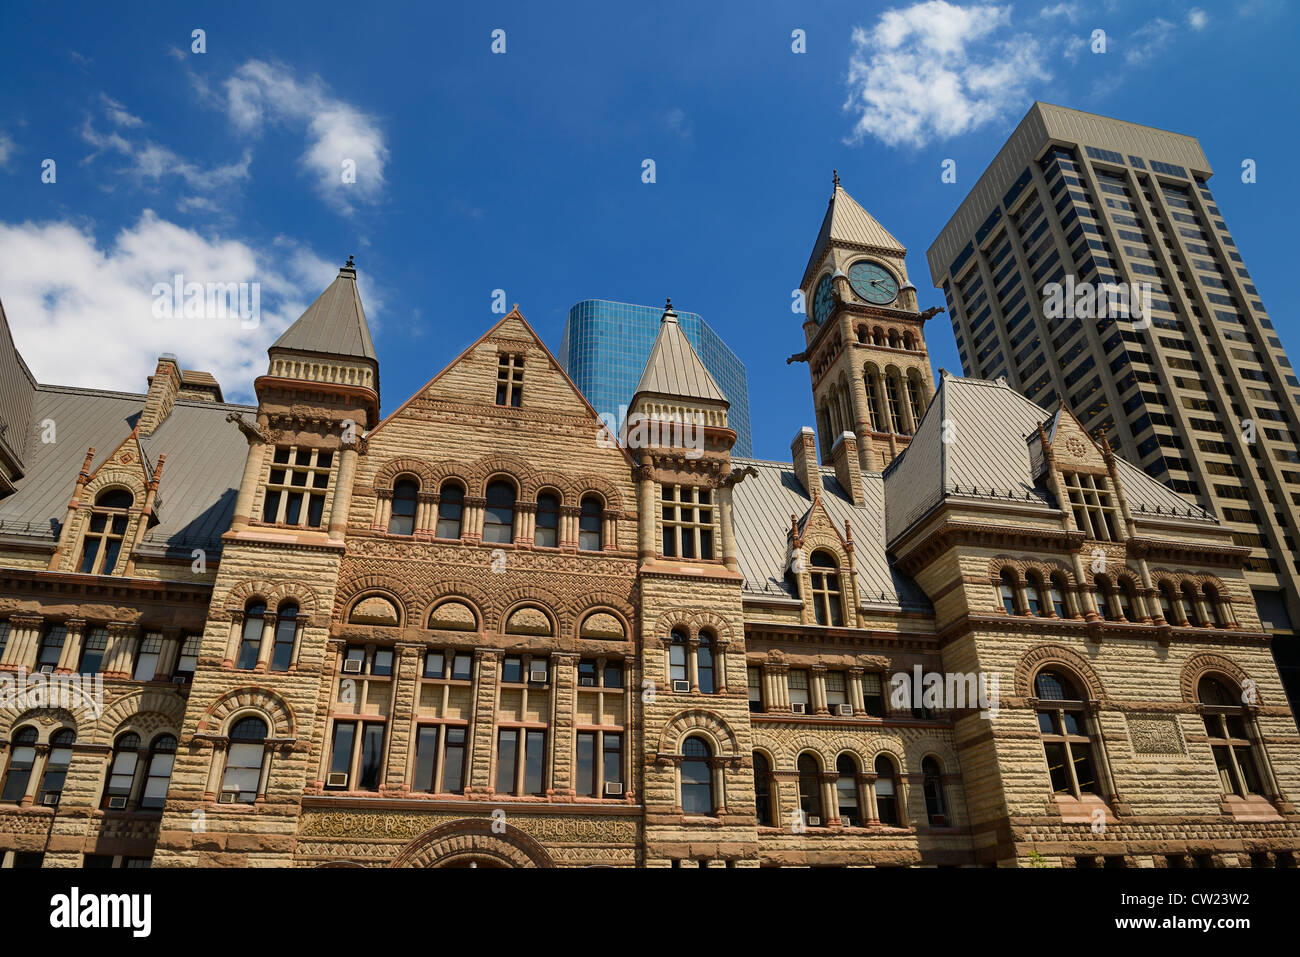 Refurbished stonework of the old 1889 Toronto City Hall with highrise buildings downtown Toronto Stock Photo